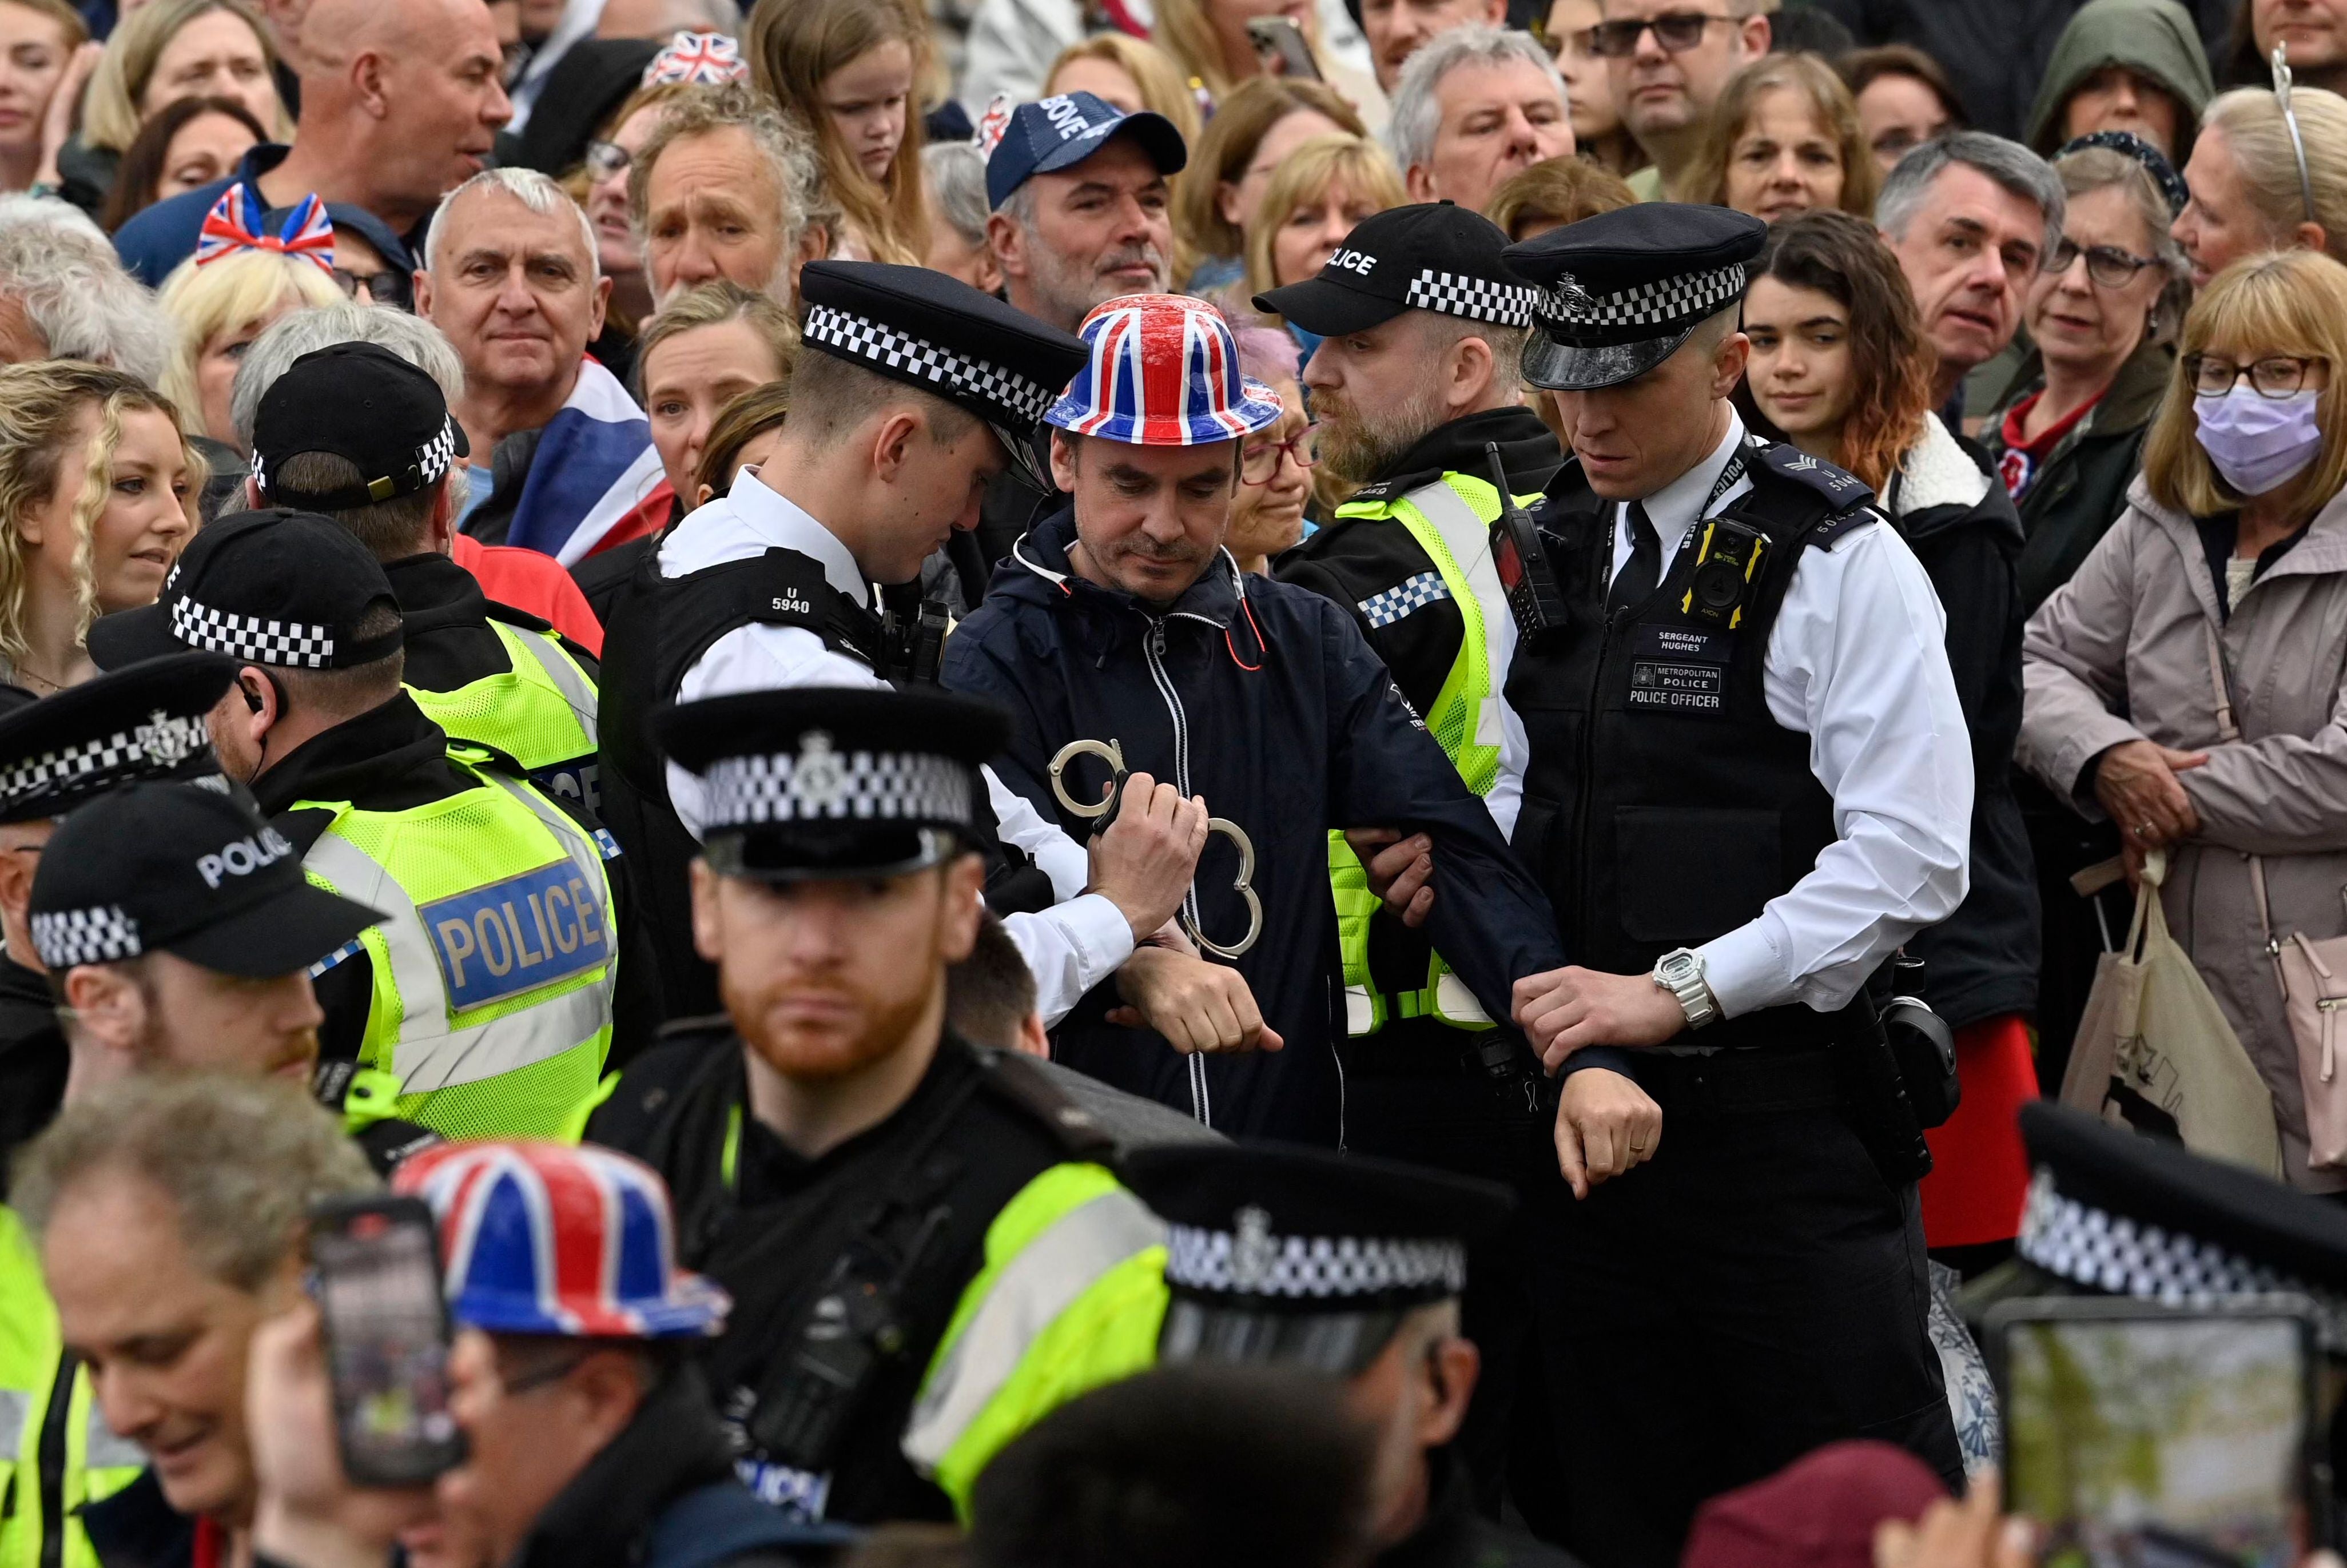 Protesters from ‘Just Stop Oil’ are arrested near Westminster Abbey before the coronation